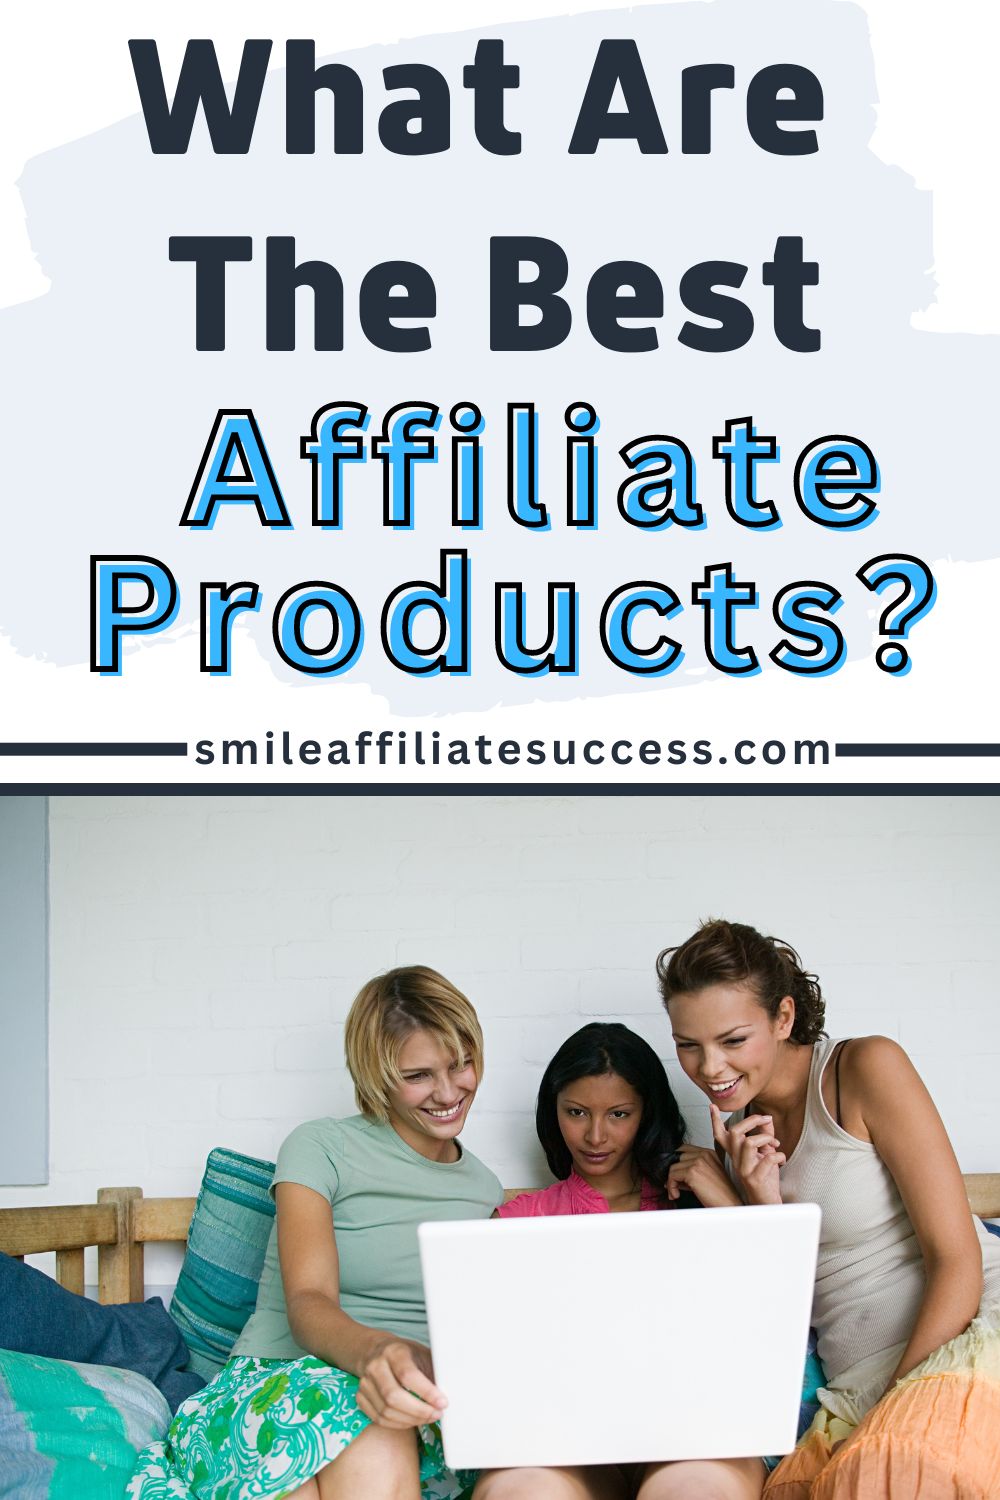 What Are The Best Affiliate Products To Sell?